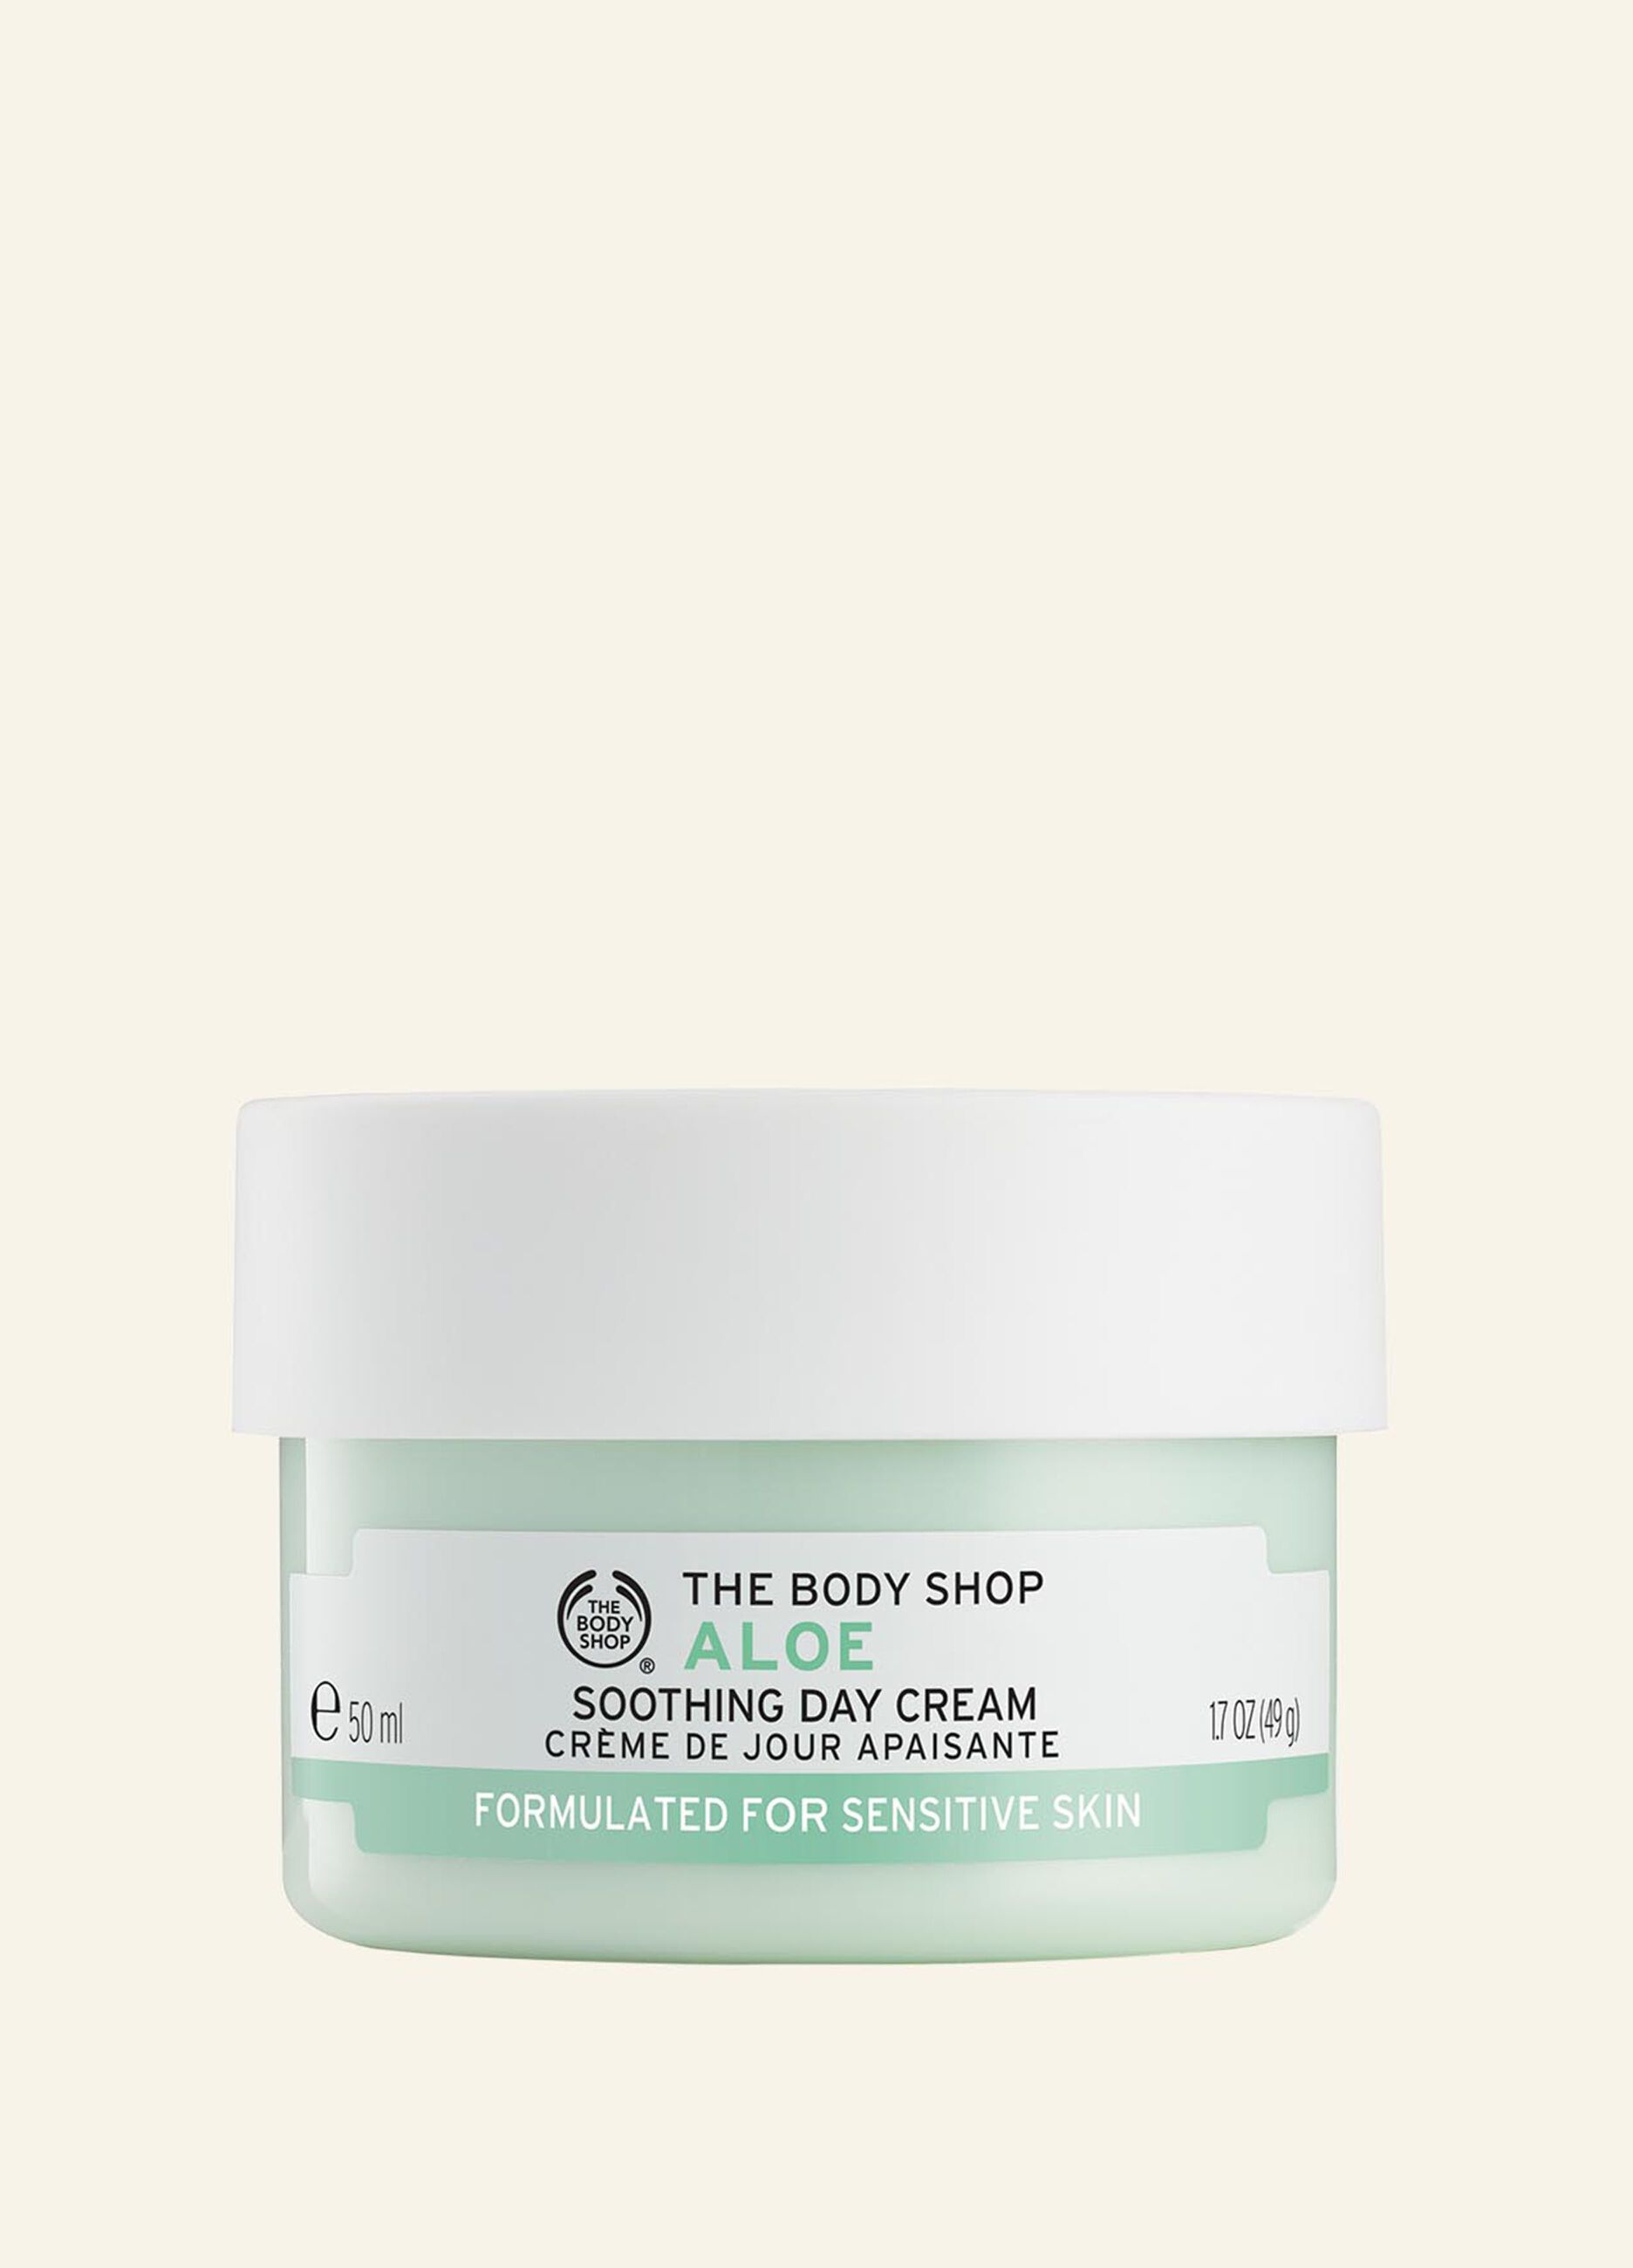 The Body Shop soothing day cream with aloe 50ml